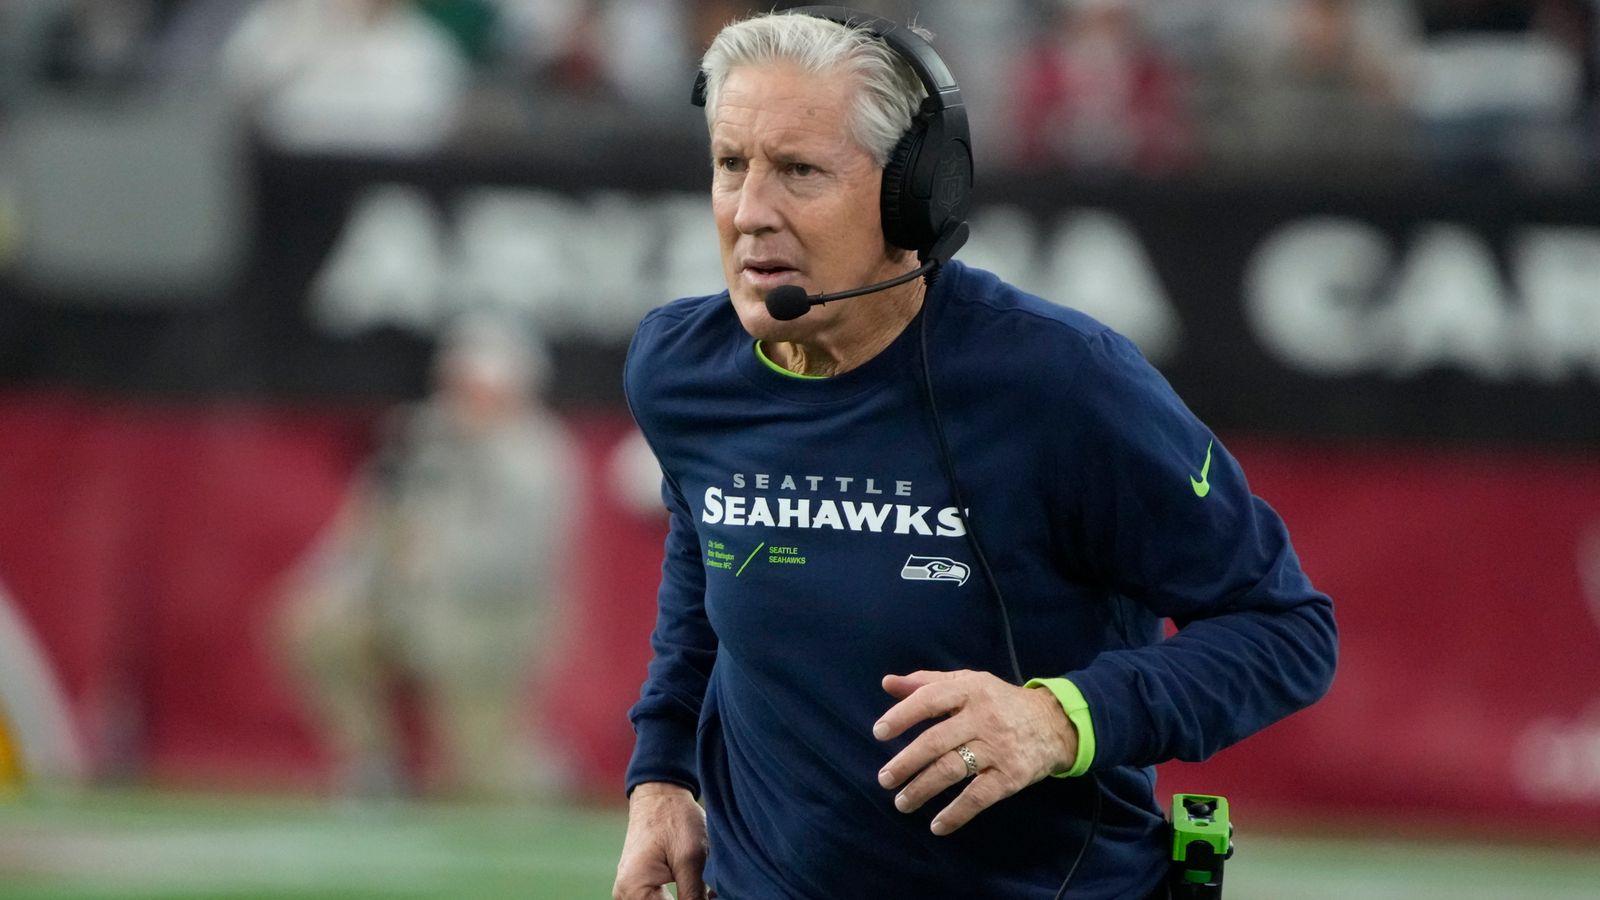 Seattle Seahawks: Pete Carroll out as head coach in shock move and will become advisor | NFL News